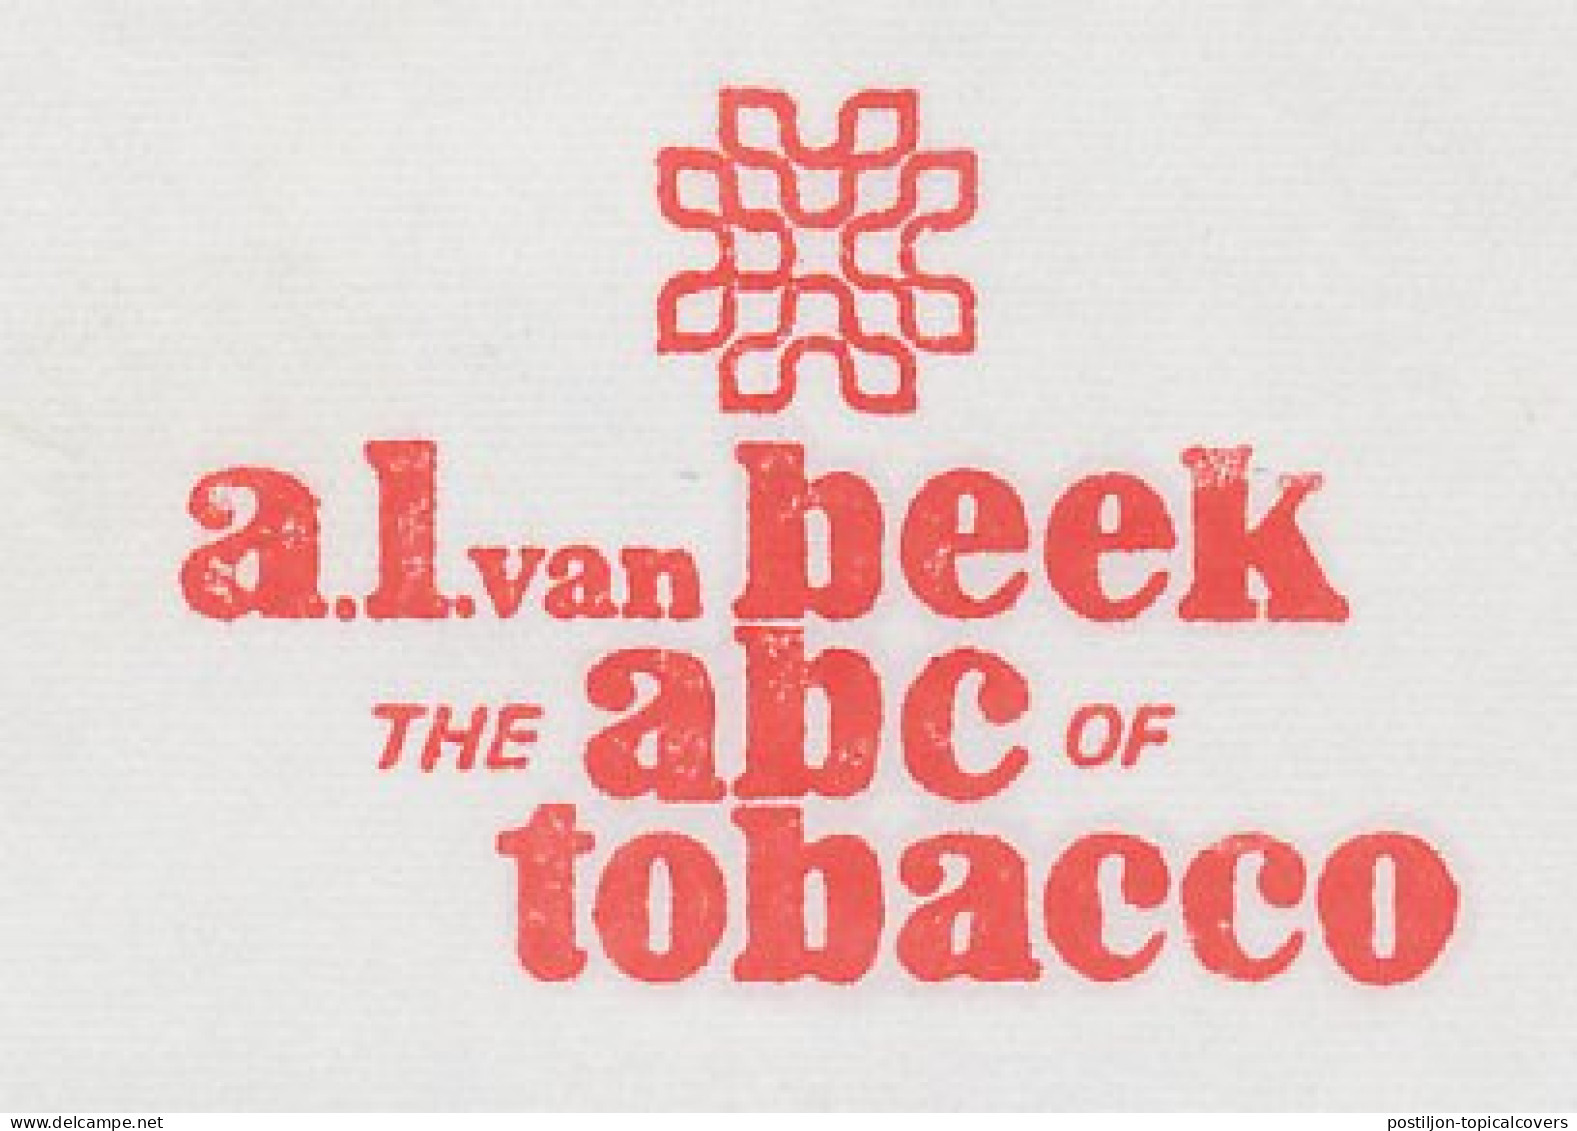 Meter Cut Netherlands 1986 The ABC Of Tobacco - Tobacco